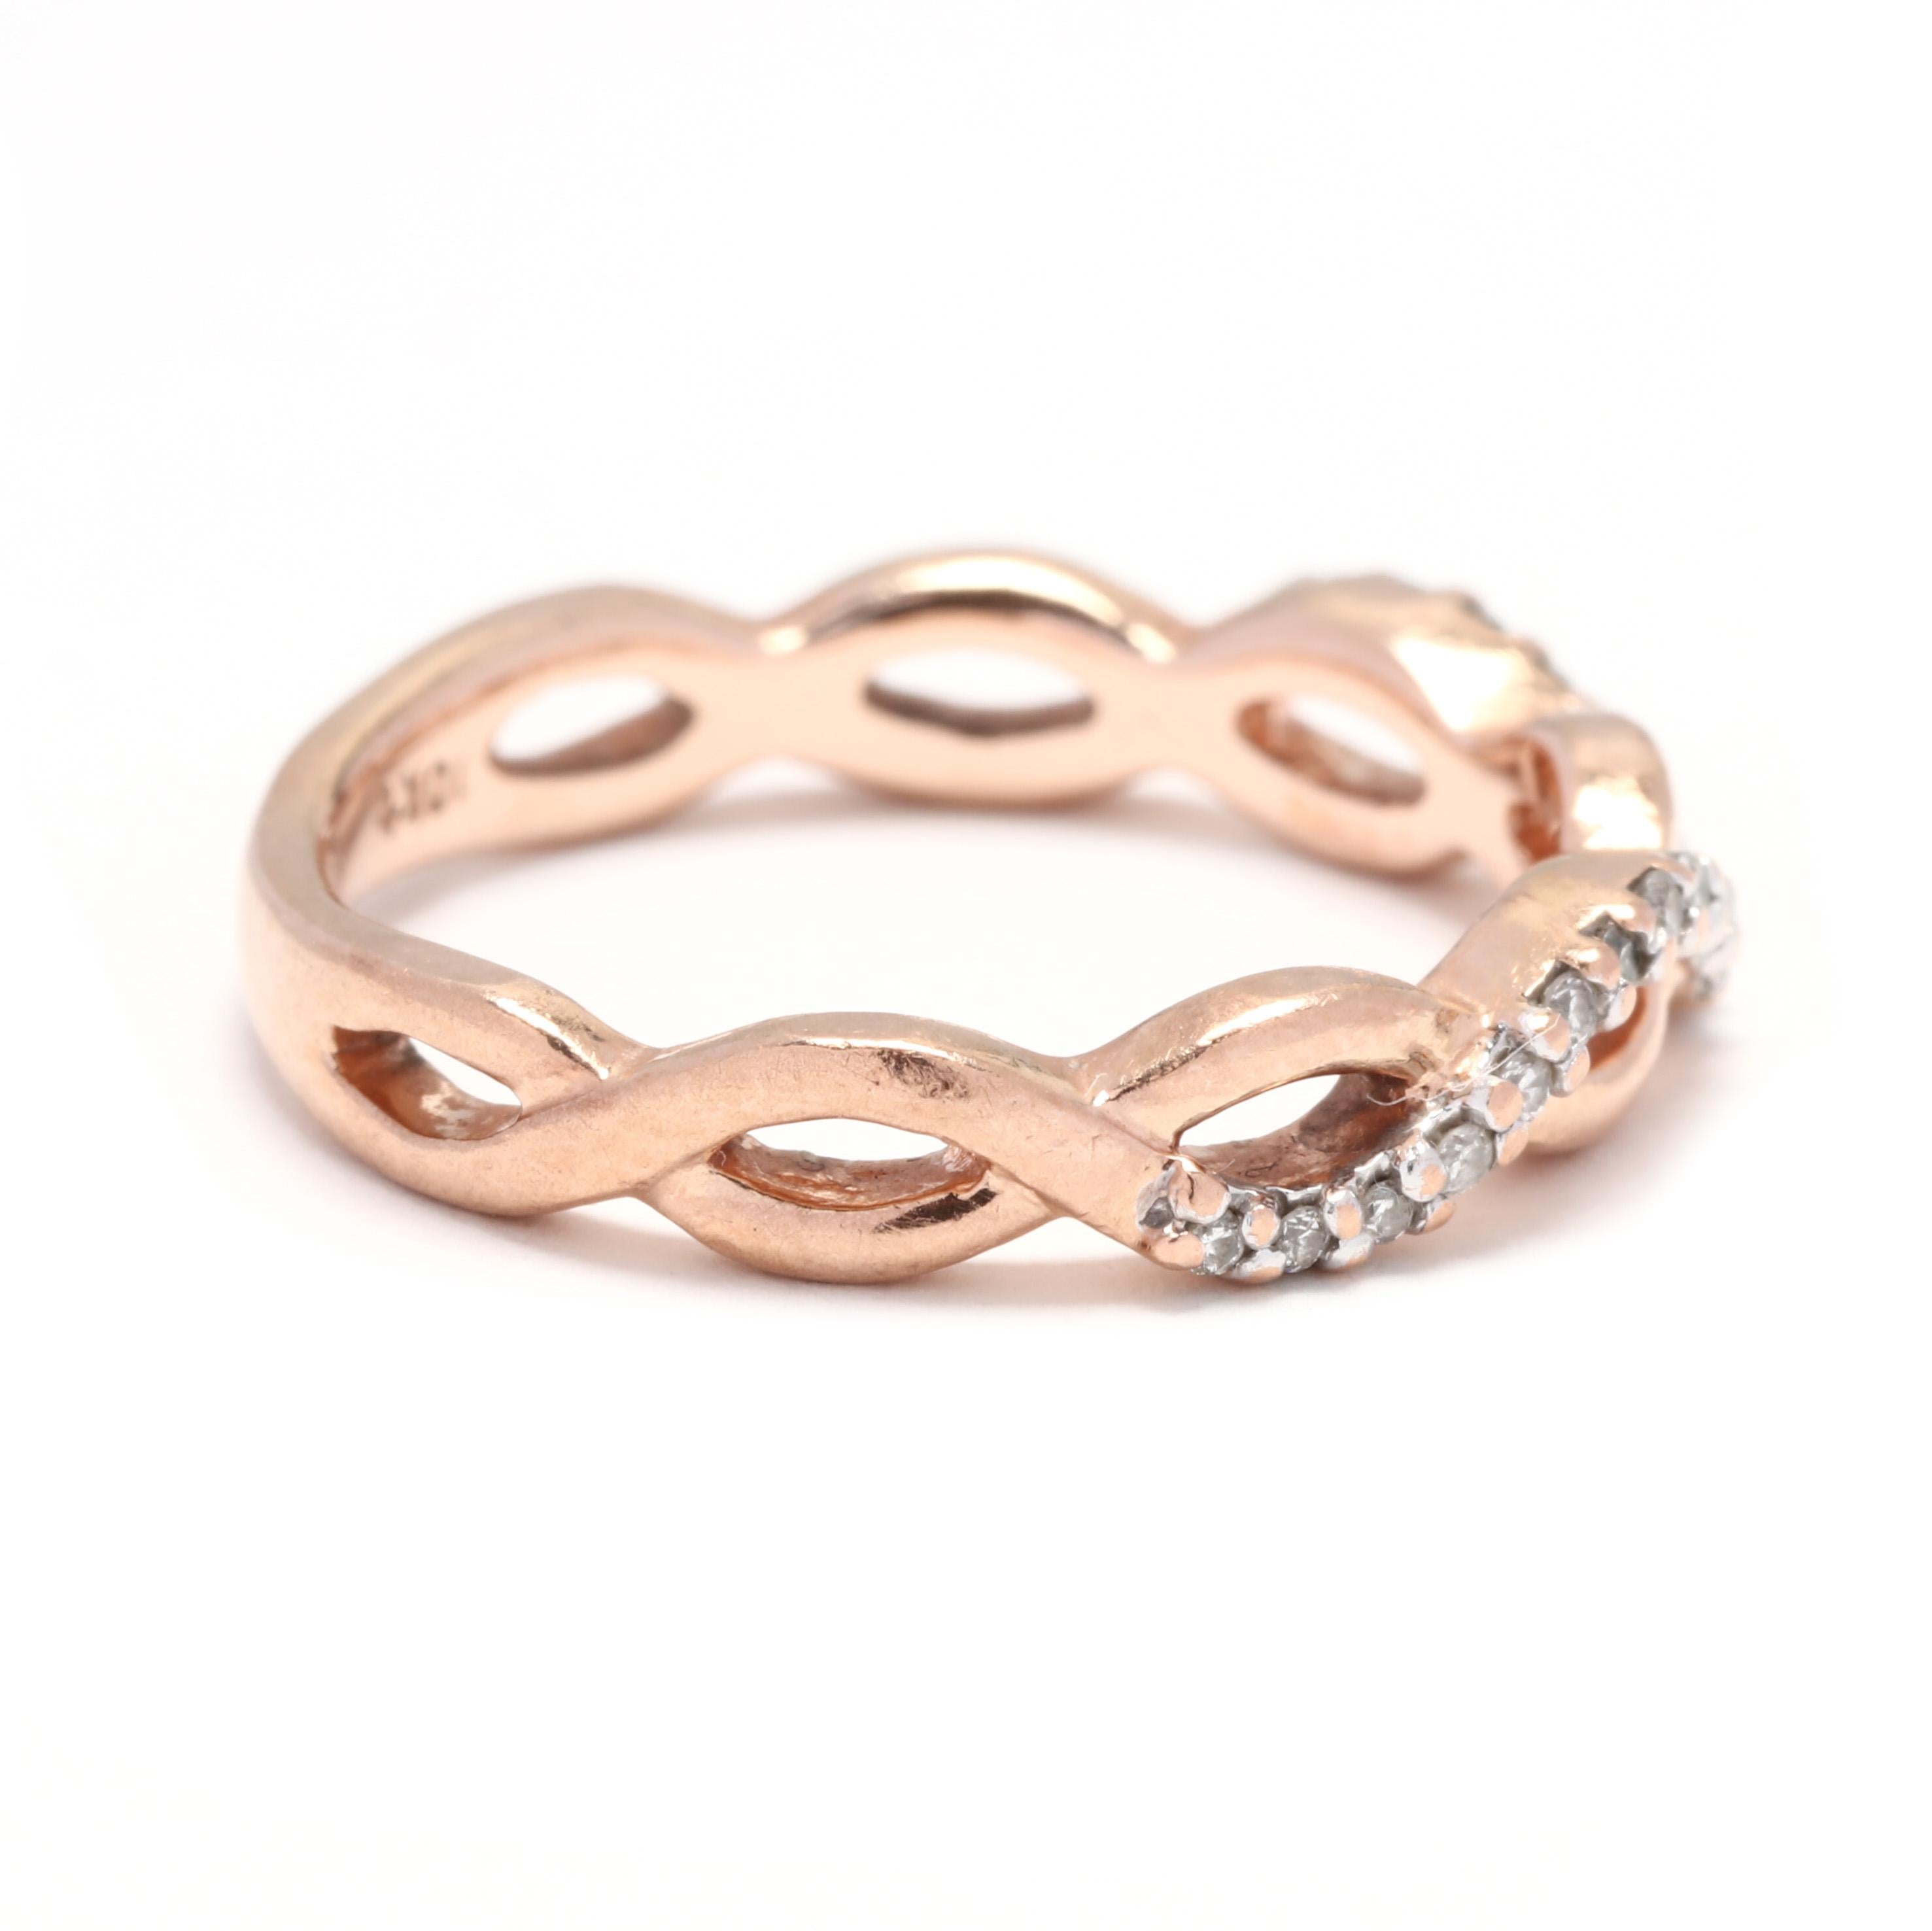 A 10 karat rose gold and diamond criss cross infinity band ring. This ring features a criss cross design that creates an infinity motif with one polished band and another with pavé set diamonds weighing approximately .10 total carats.

Stones:
-